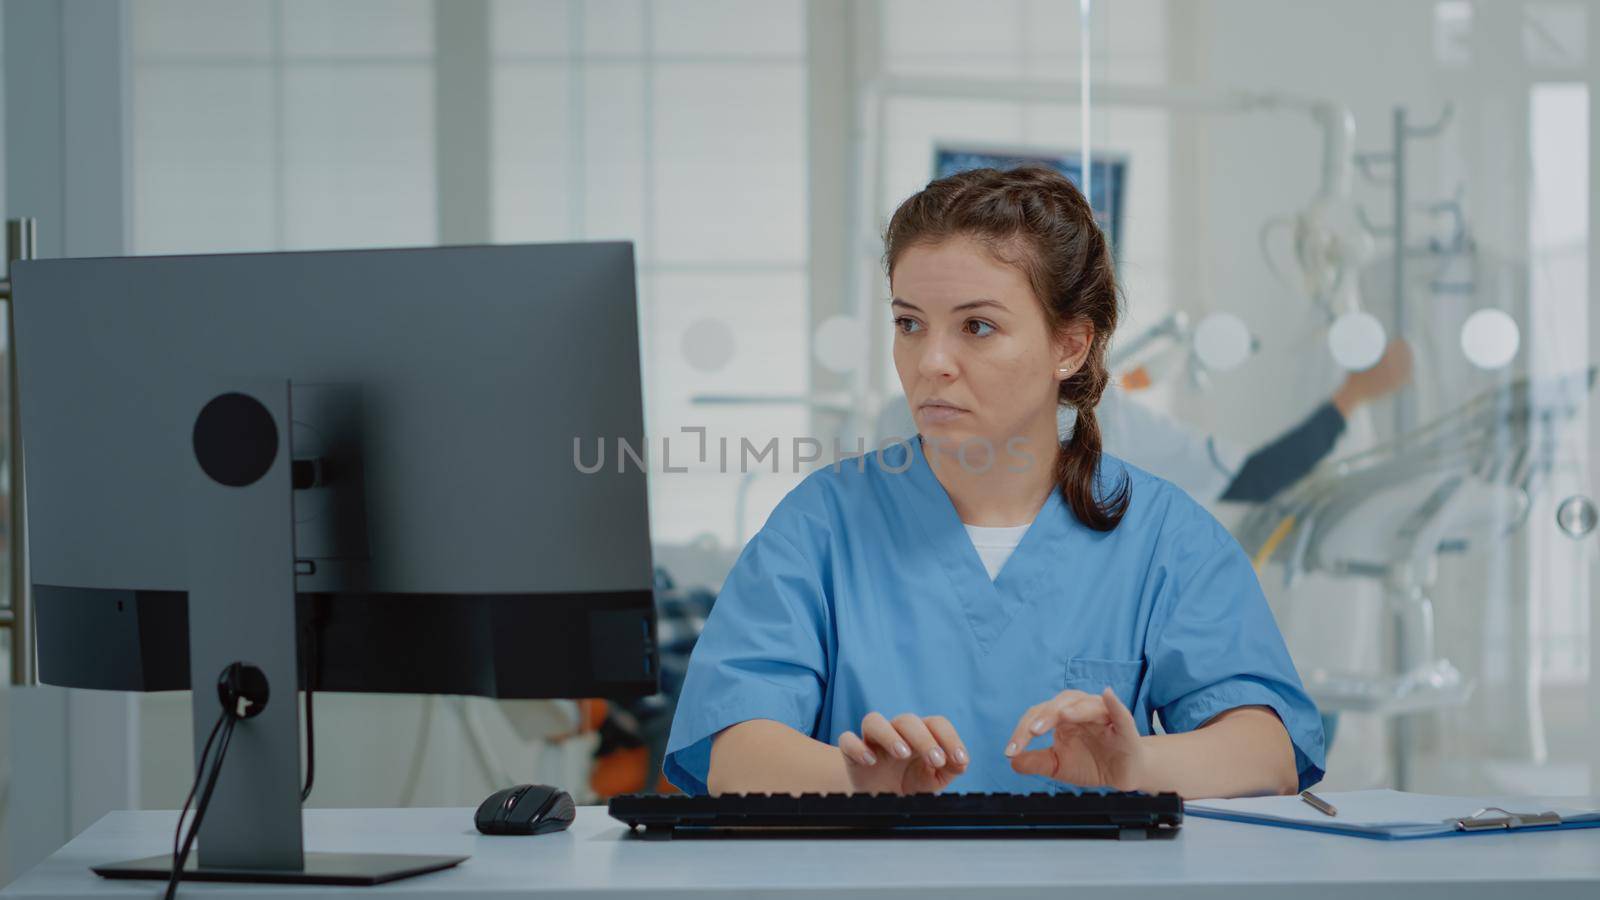 Stomatological assistant typing on computer keyboard sitting at oral clinic desk. Nurse using technology while professional orthodontist consulting patient with equipment in background